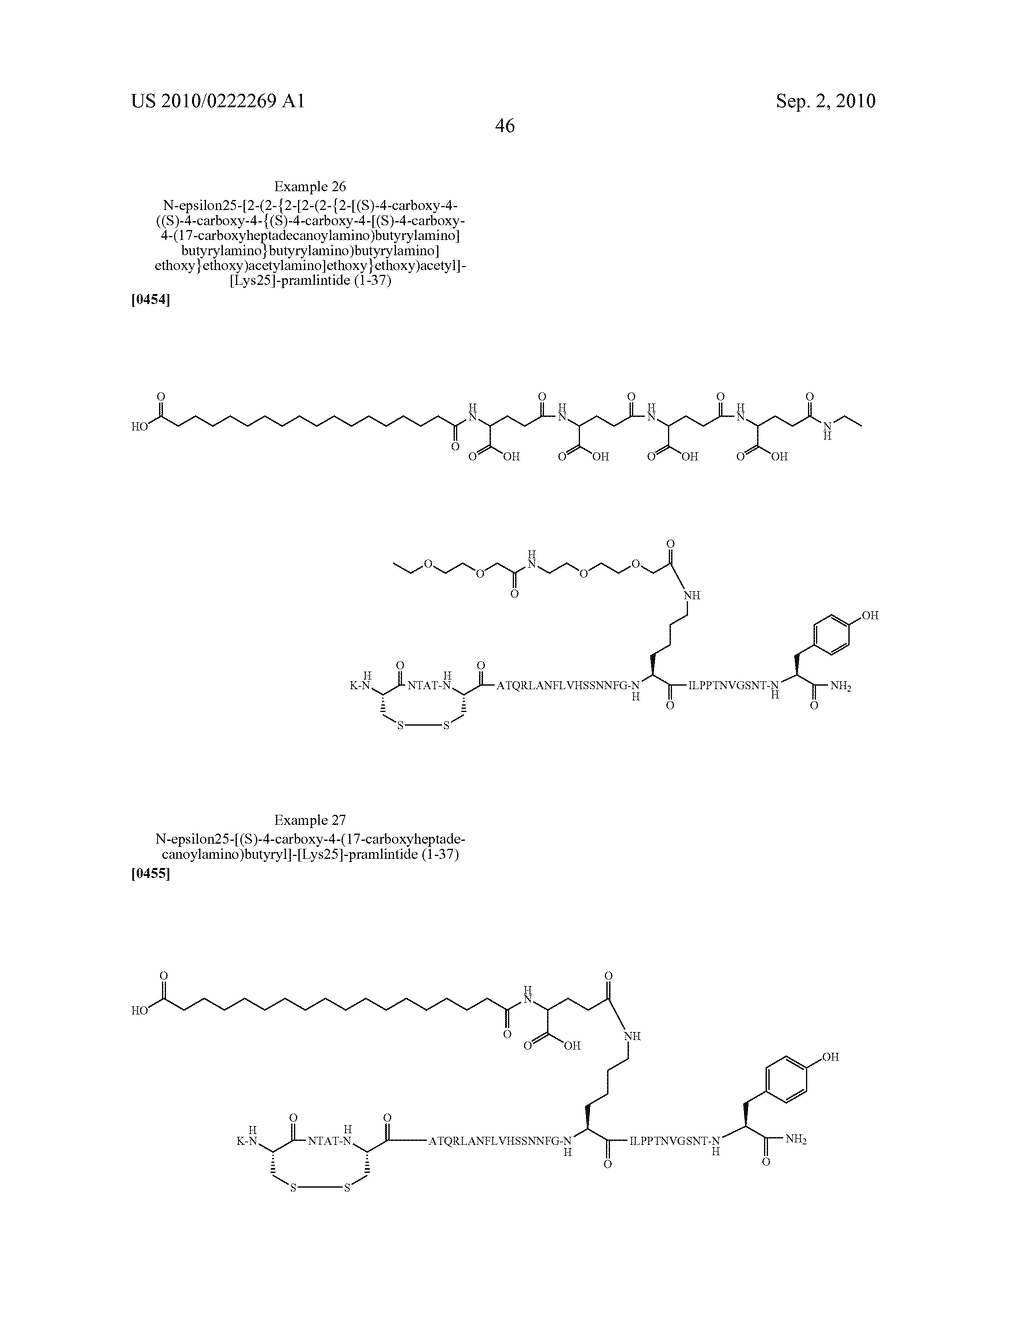 IMPROVED DERIVATIVES OF AMYLIN - diagram, schematic, and image 47